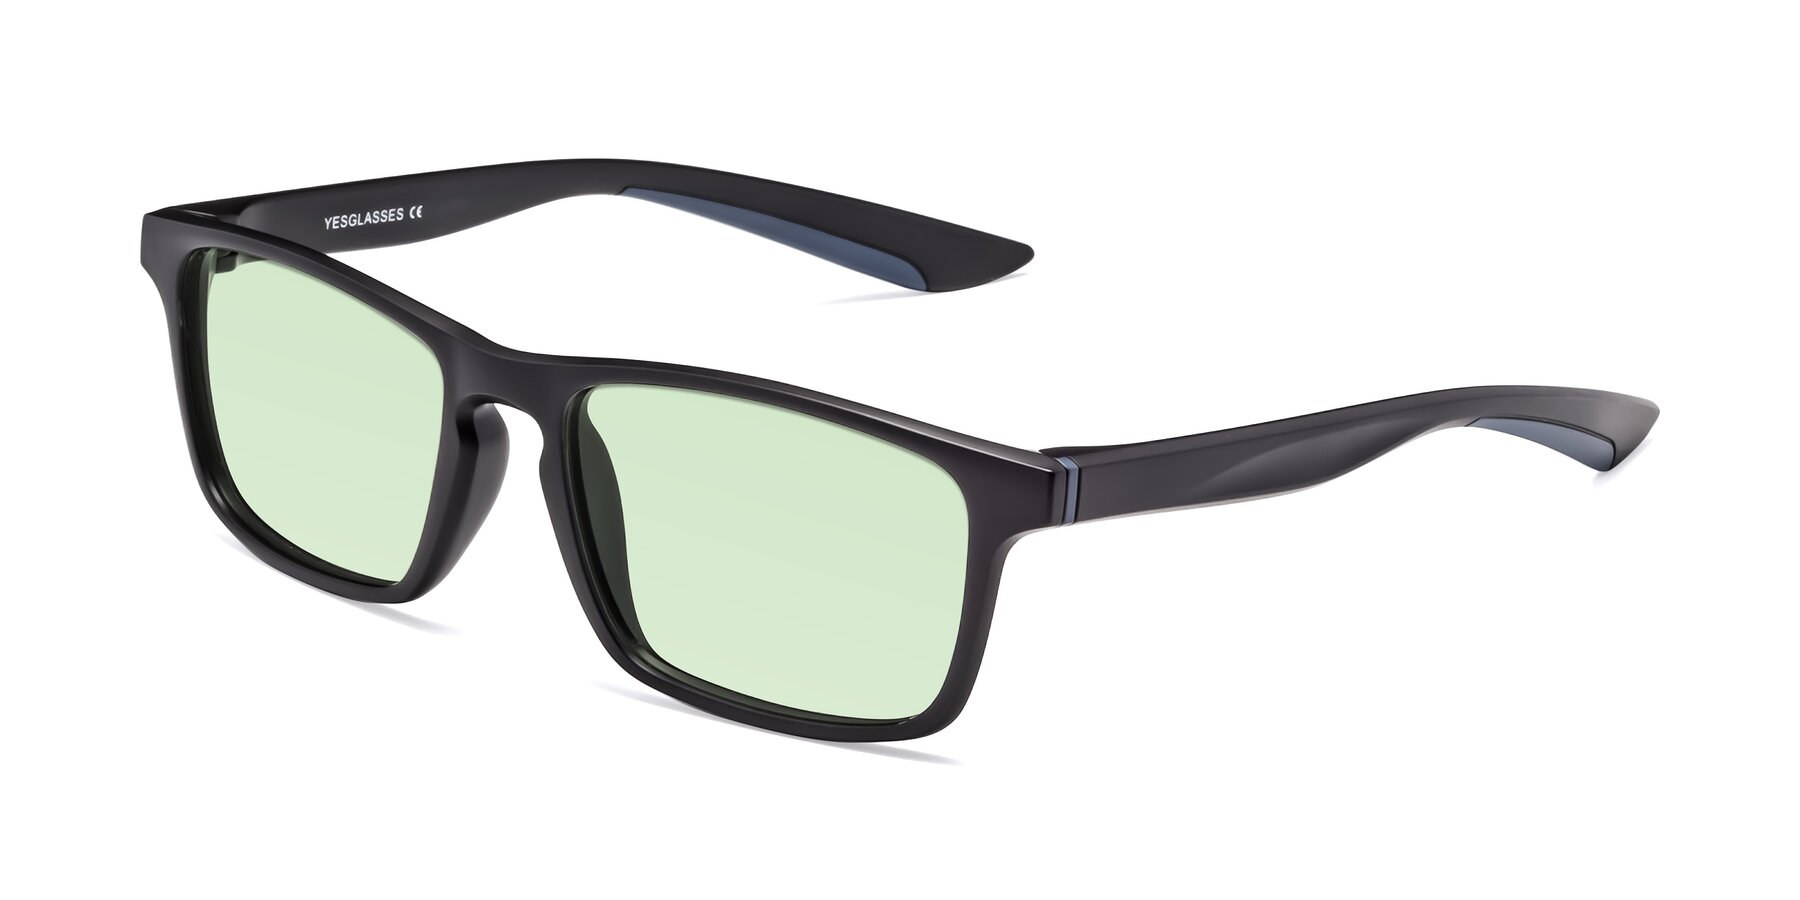 Angle of Passion in Matte Black-Blue with Light Green Tinted Lenses